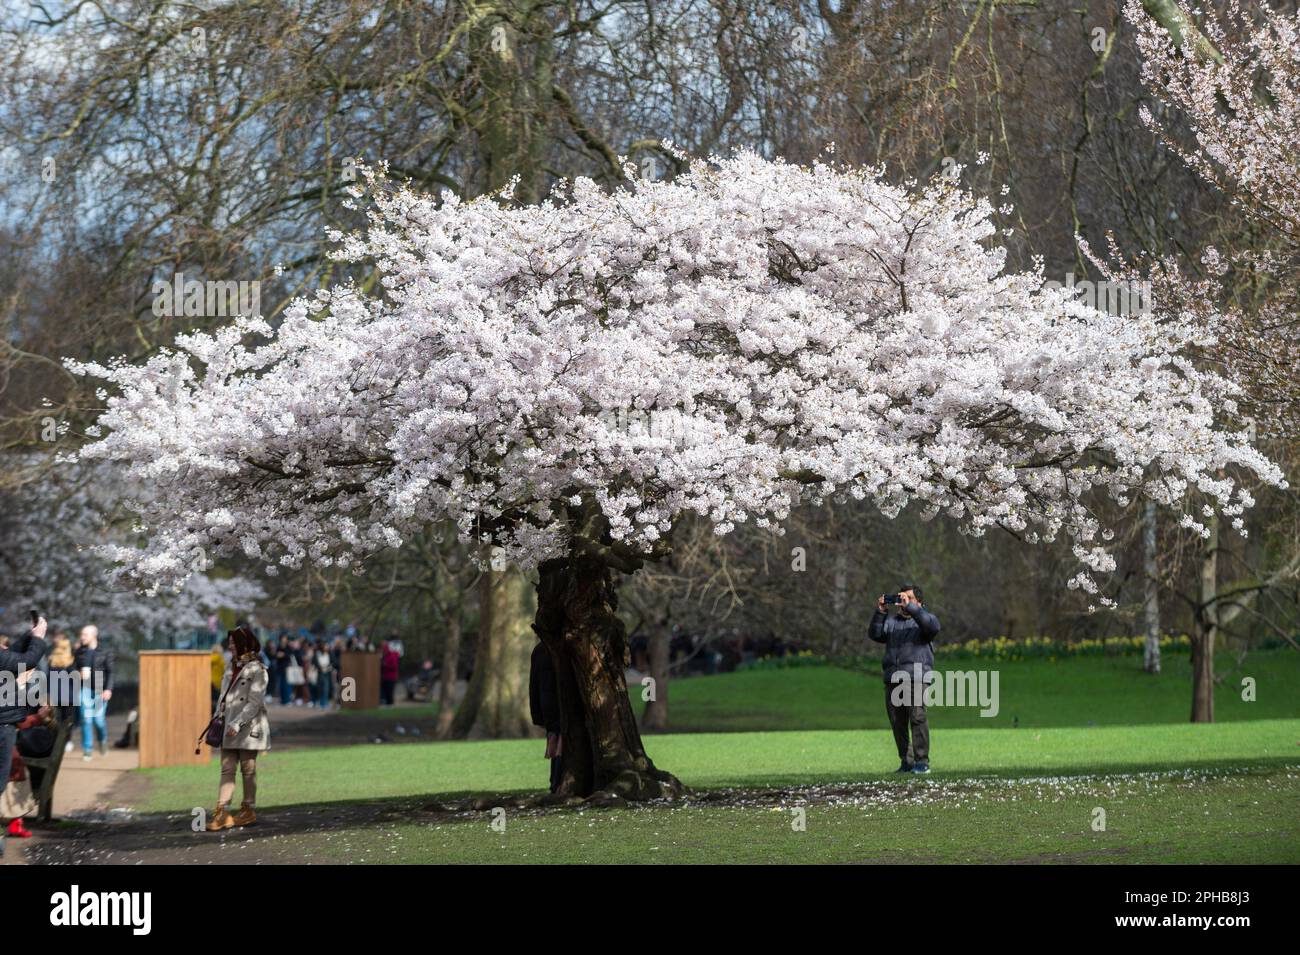 London, UK. 27 March 2023.  People view blossom flowering in St. James’s Park.  According to the Royal Horticultural Society (RHS), trees will be abundant with blossom this spring because of the perfect conditions last year for bud formation, and also because early flowering has been prevented by the cold this February.  Credit: Stephen Chung / Alamy Live News Stock Photo